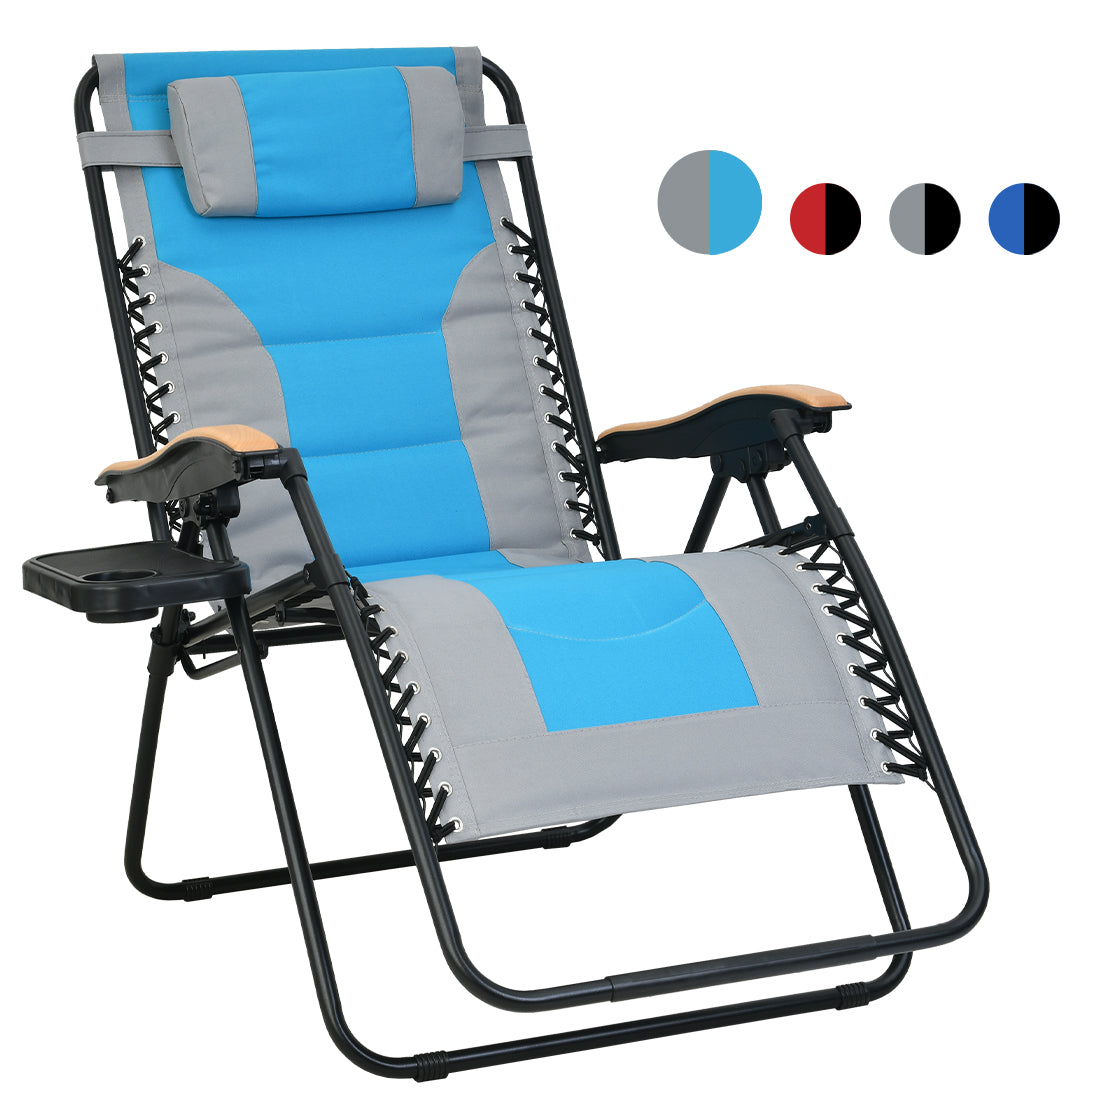 Patio Watcher Oversized Quilted Zero Gravity Chair Folding Recliner Chair